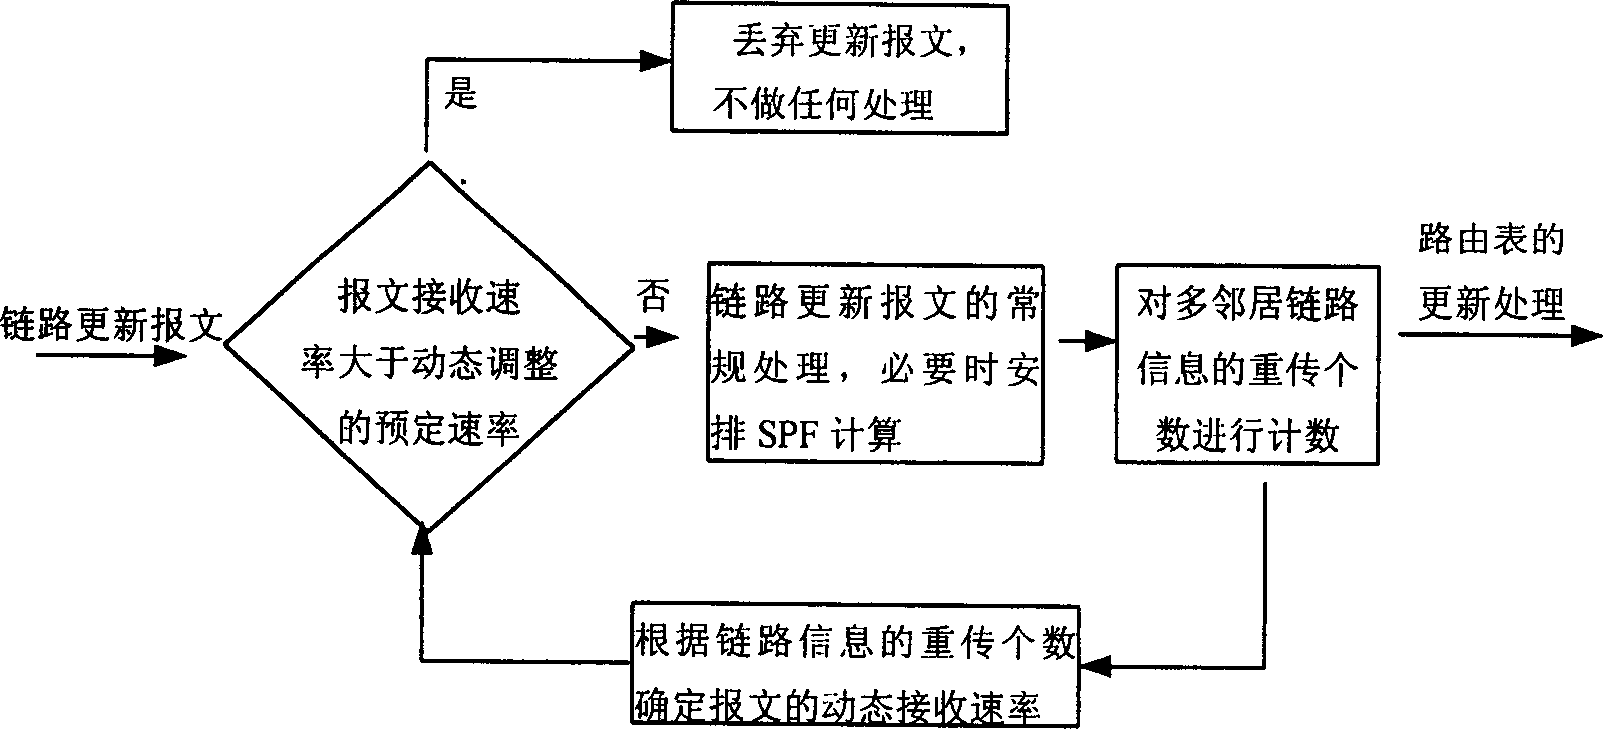 Method for solving stability of OSPF protocol at multi-neighbour high route